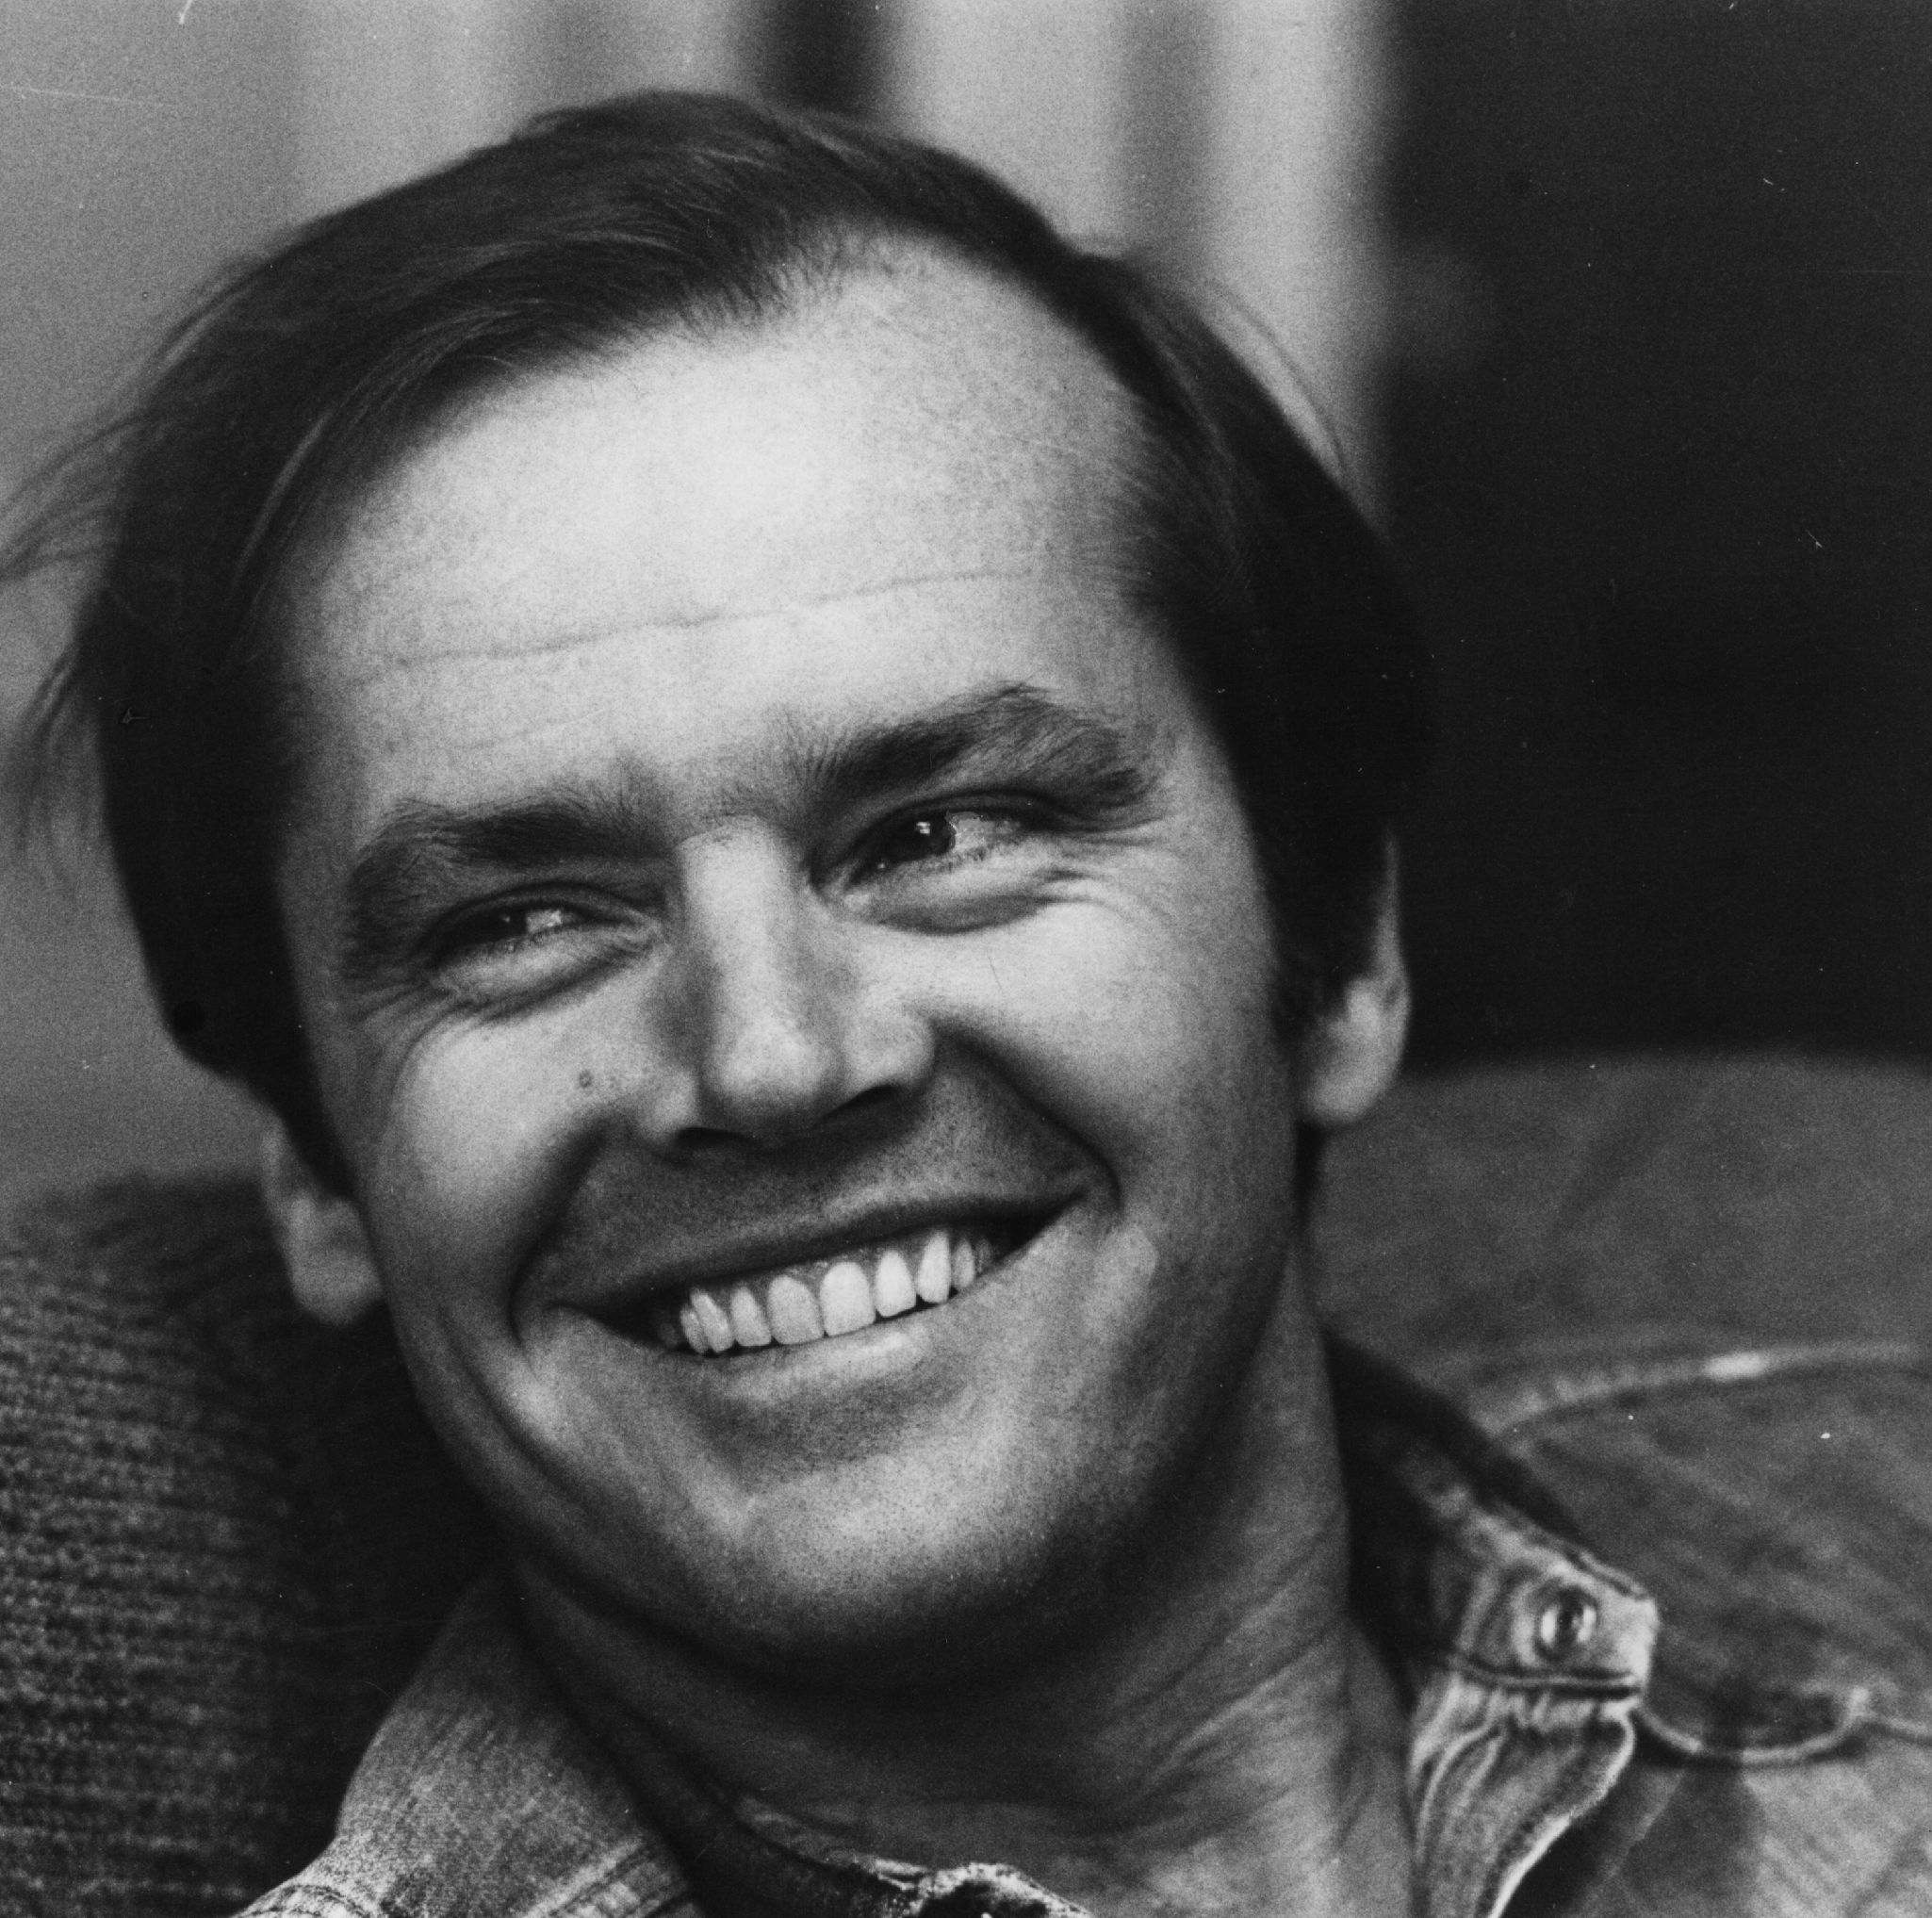 41 Photos That Show the Eternal Cool of Jack Nicholson